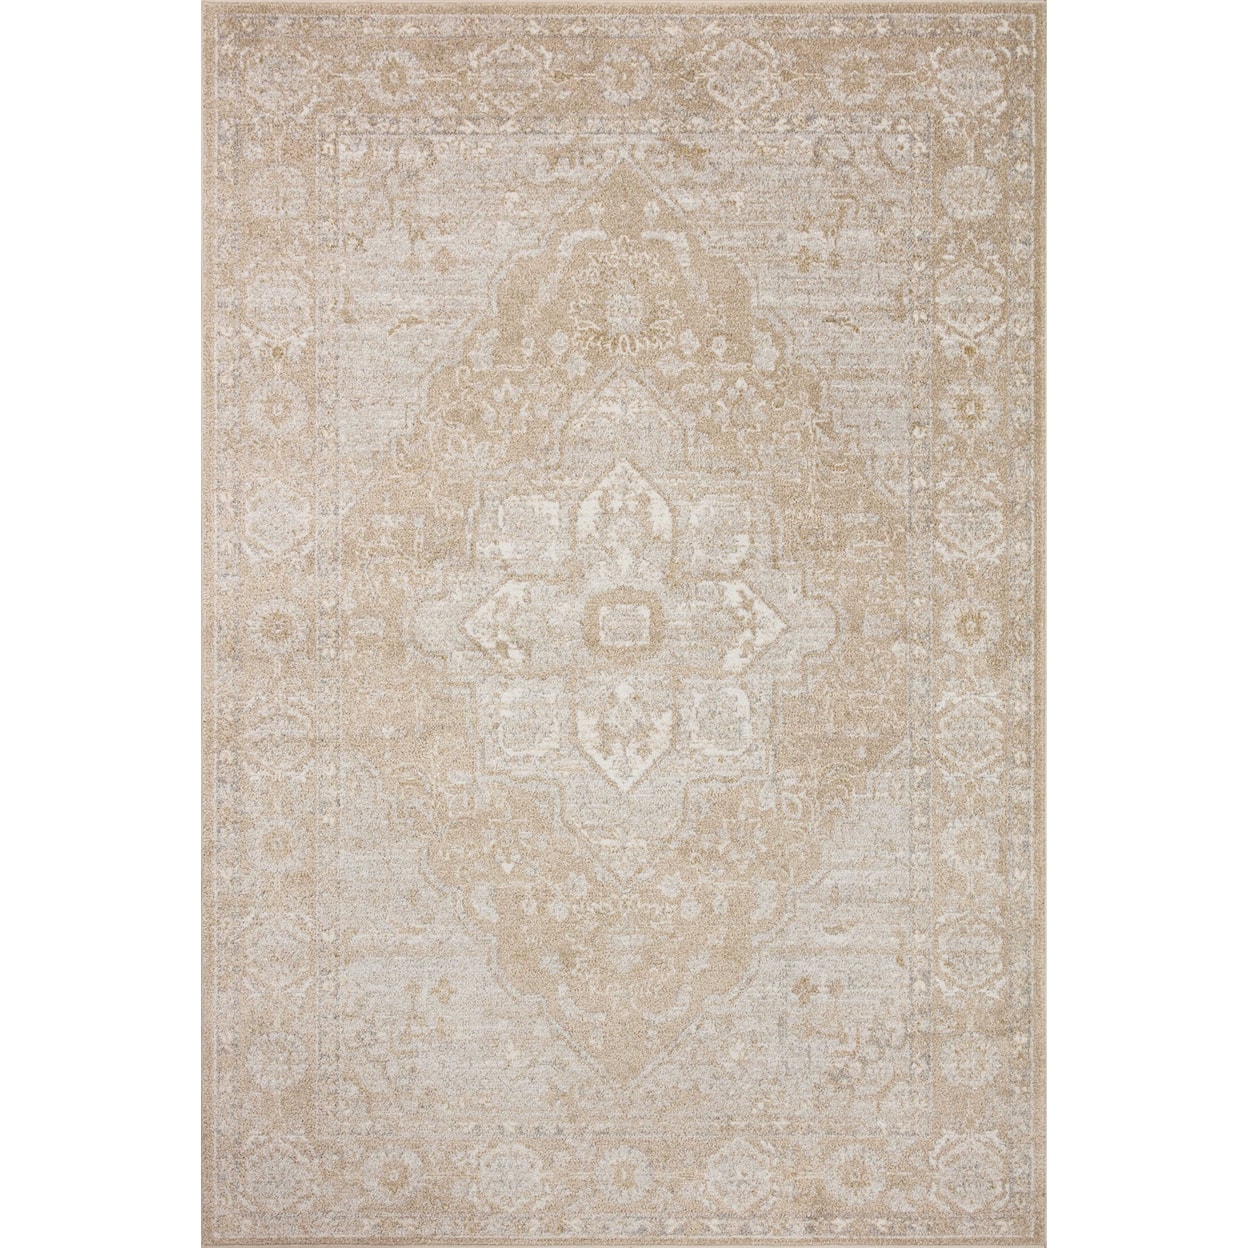 Loloi Rugs Odette 9'2" x 9'2" Round  Rug